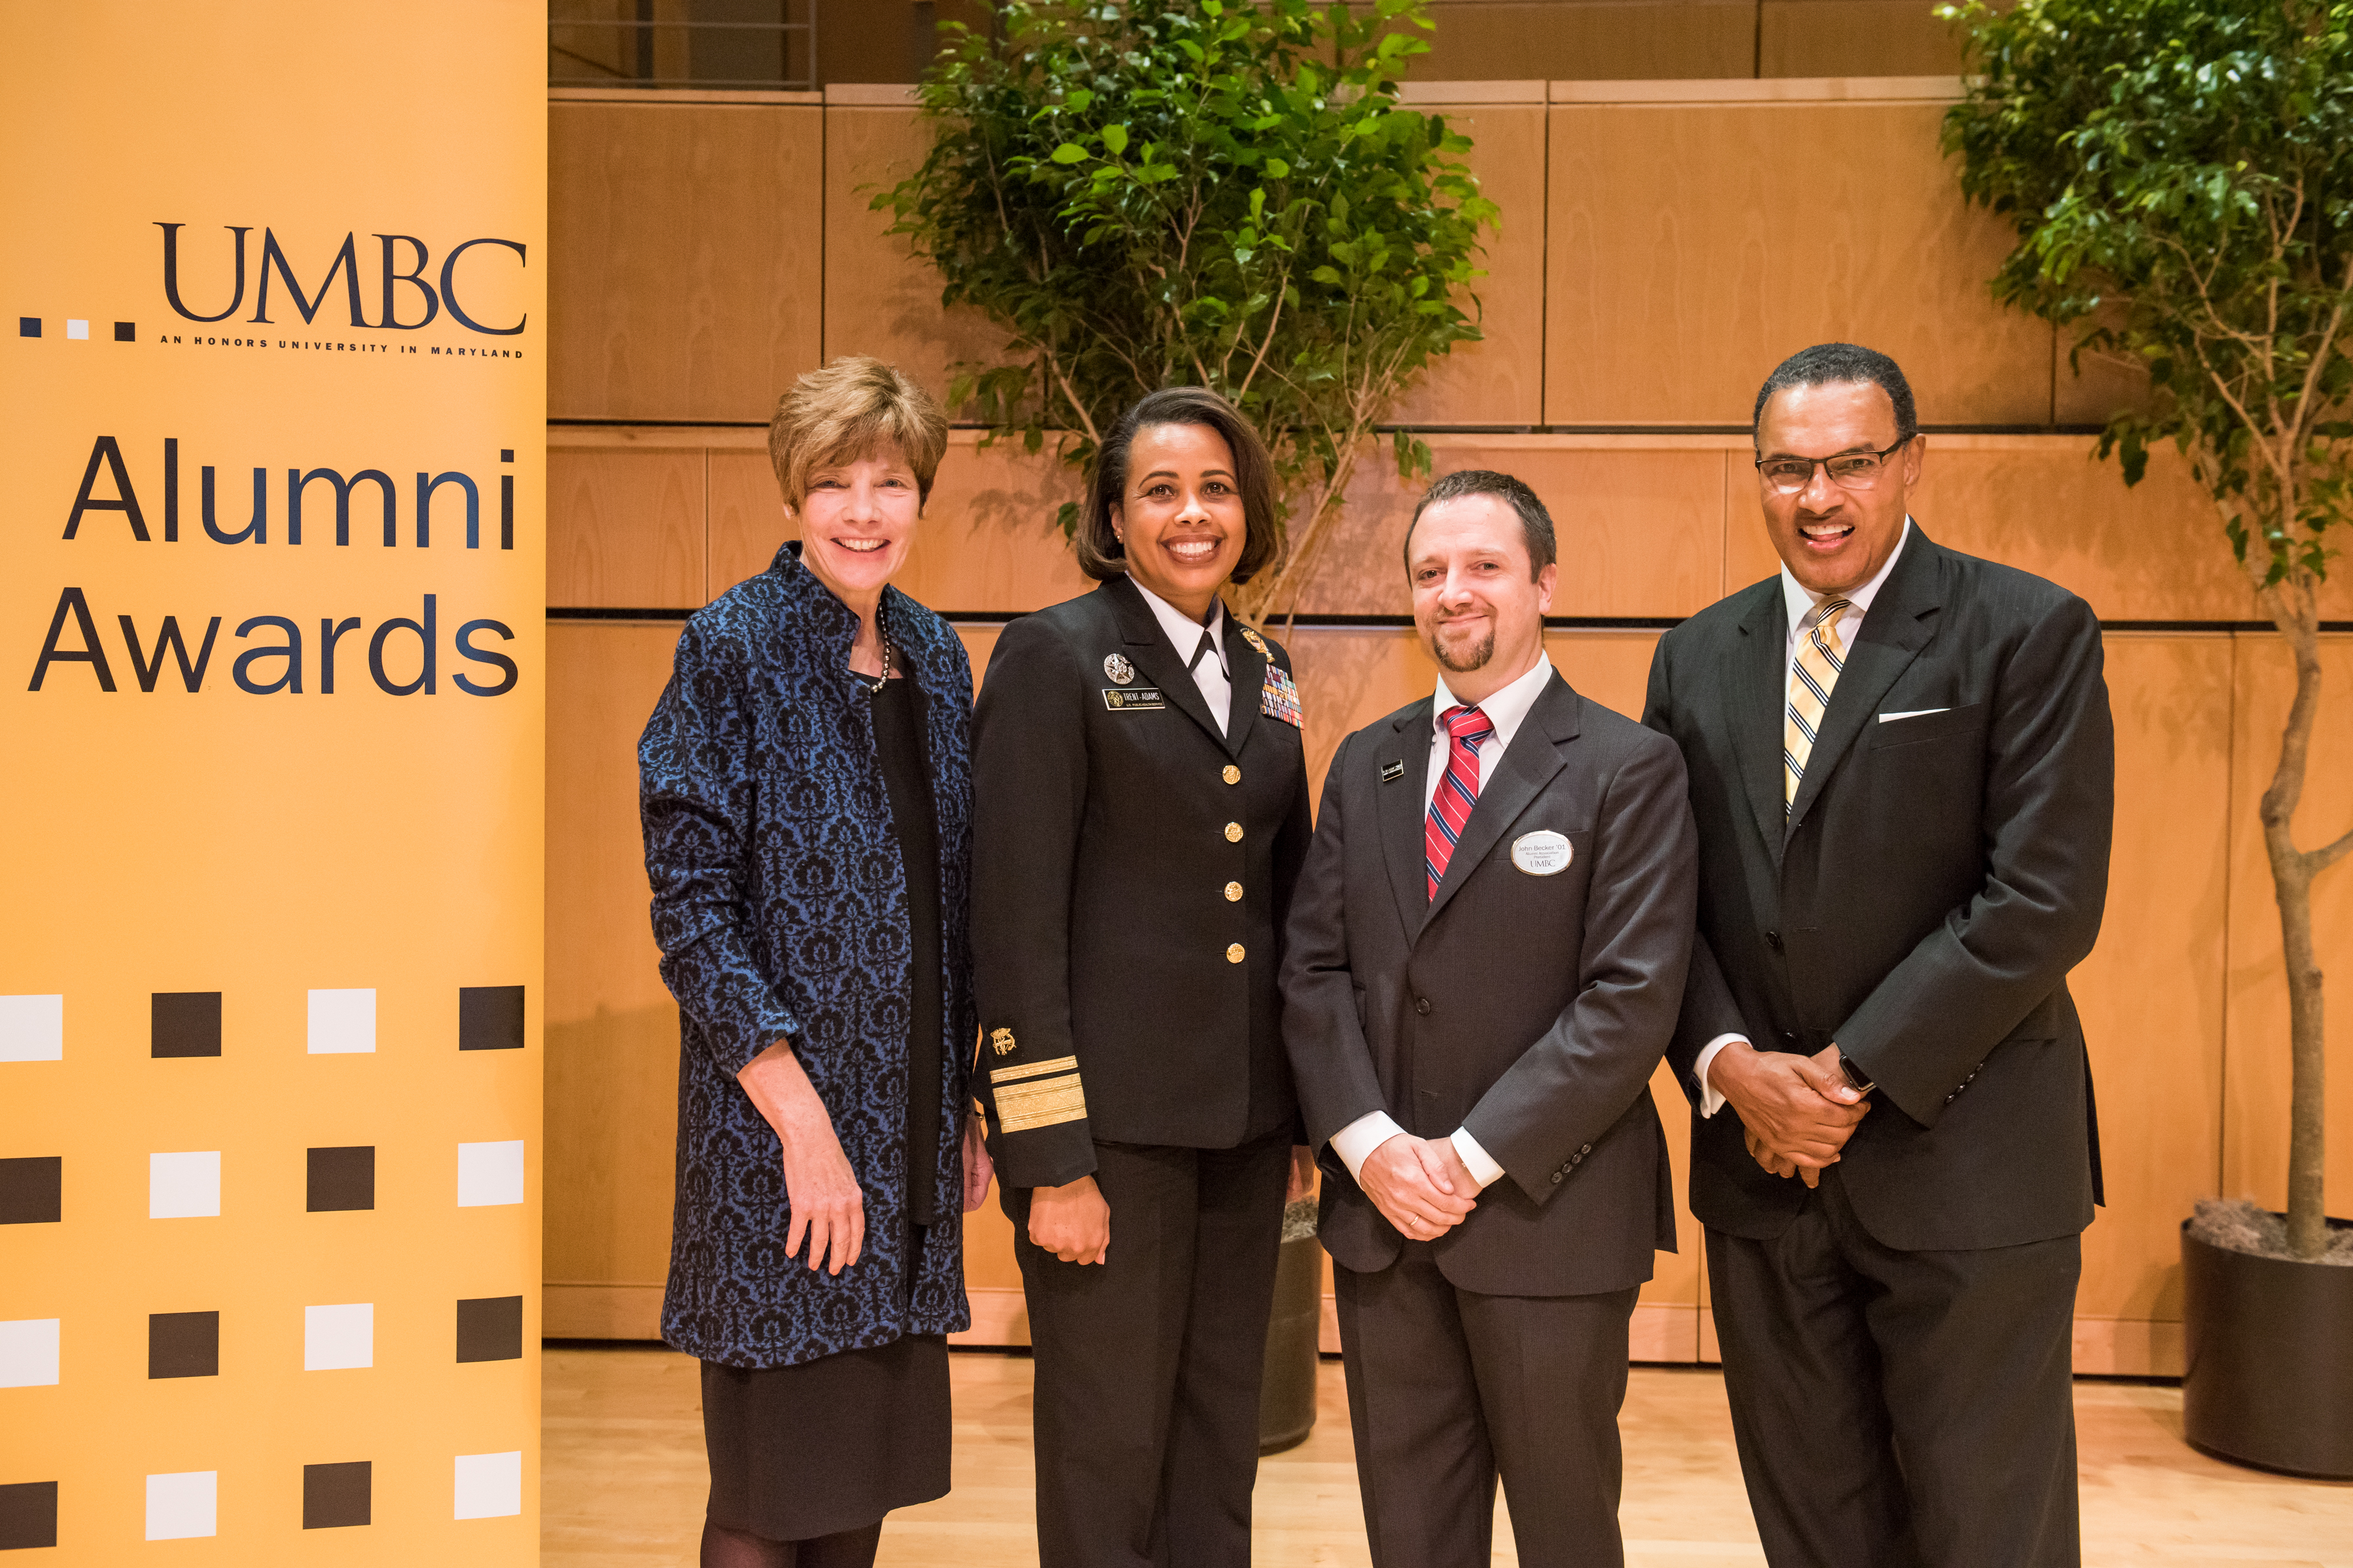 A group picture of Nancy Miller, Rear Admiral Sylvia Trent-Adams, and Freeman Hrabowski at the UMBC Alumni Awards 2017.